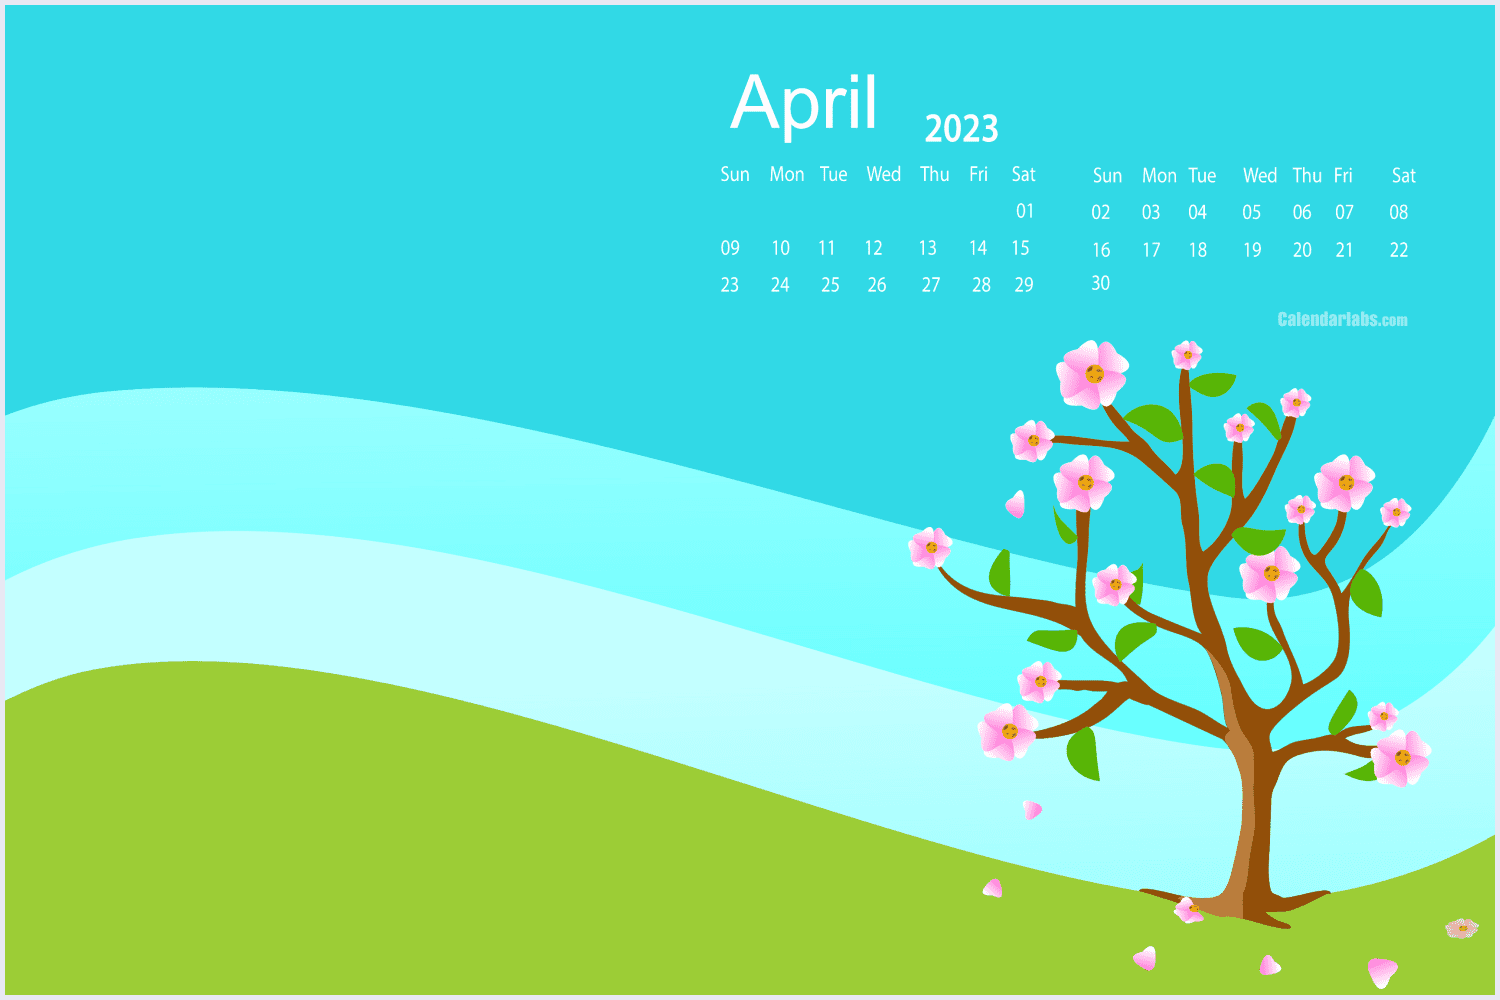 Chic and modern Blue and Green Beautiful April 2023 Calendar.